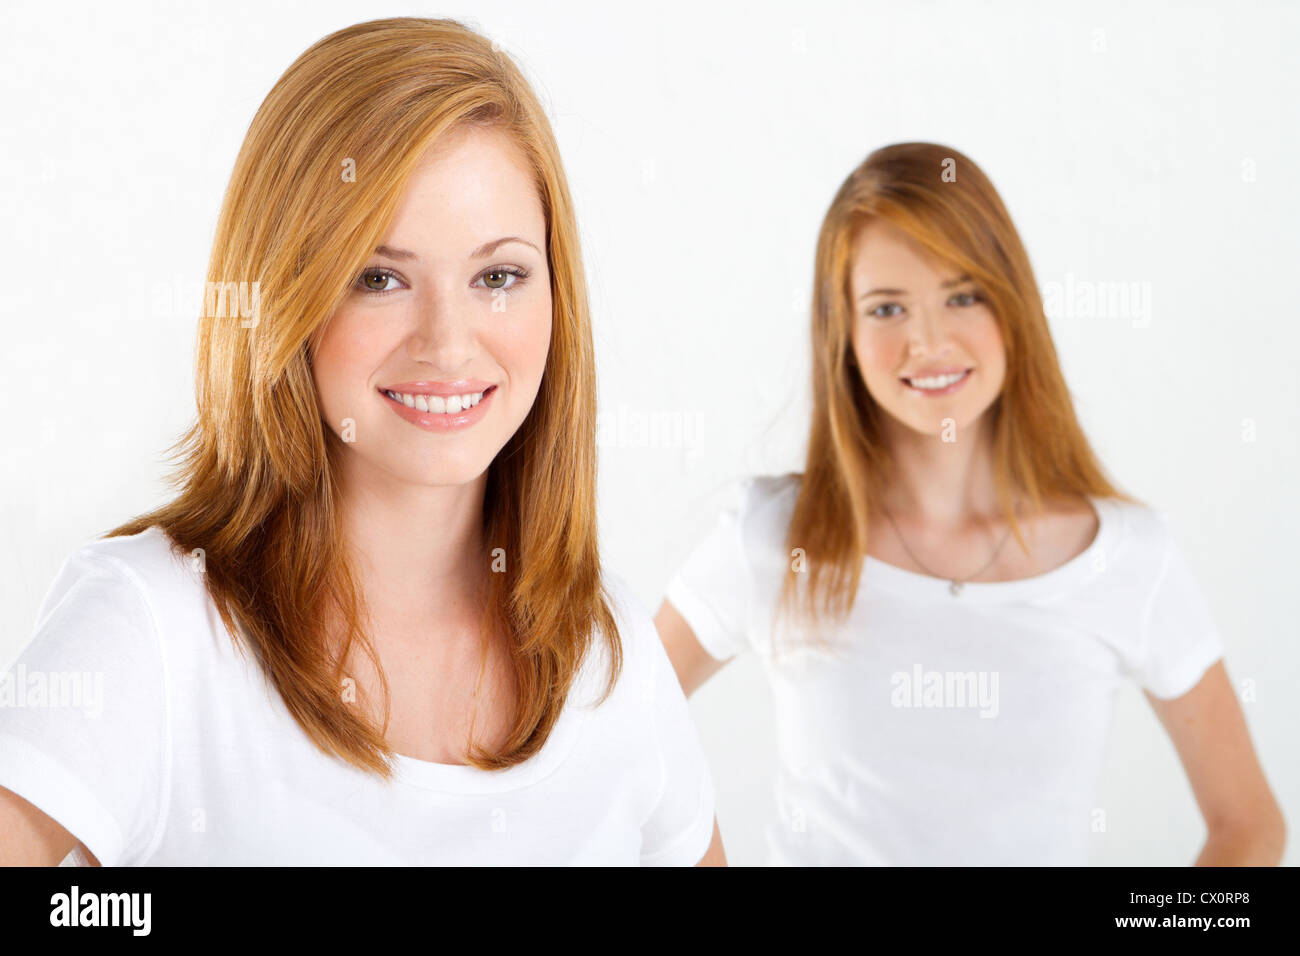 young beautiful teenage girl on a white background Stock Photo - Alamy